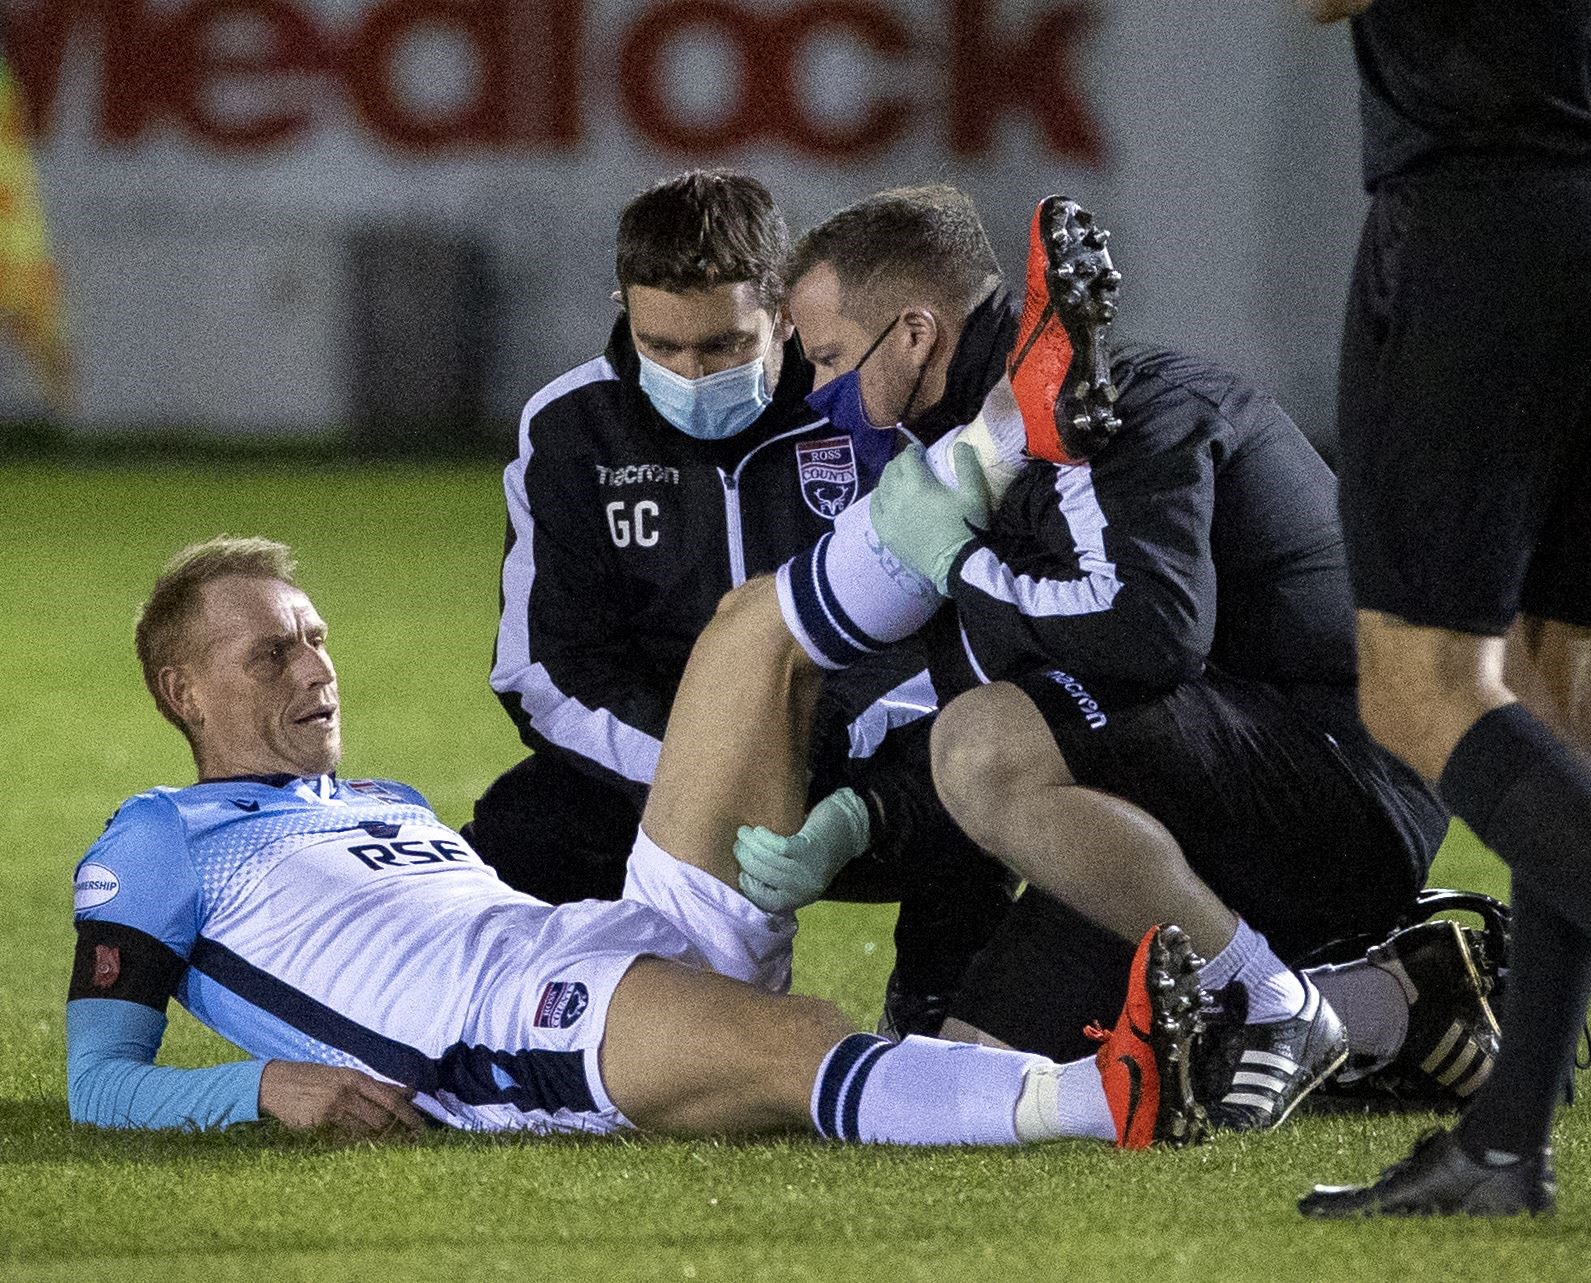 Ross County's Carl Tremarco got an early injury against Elgin and had to go off. Pictures: Ken Macpherson